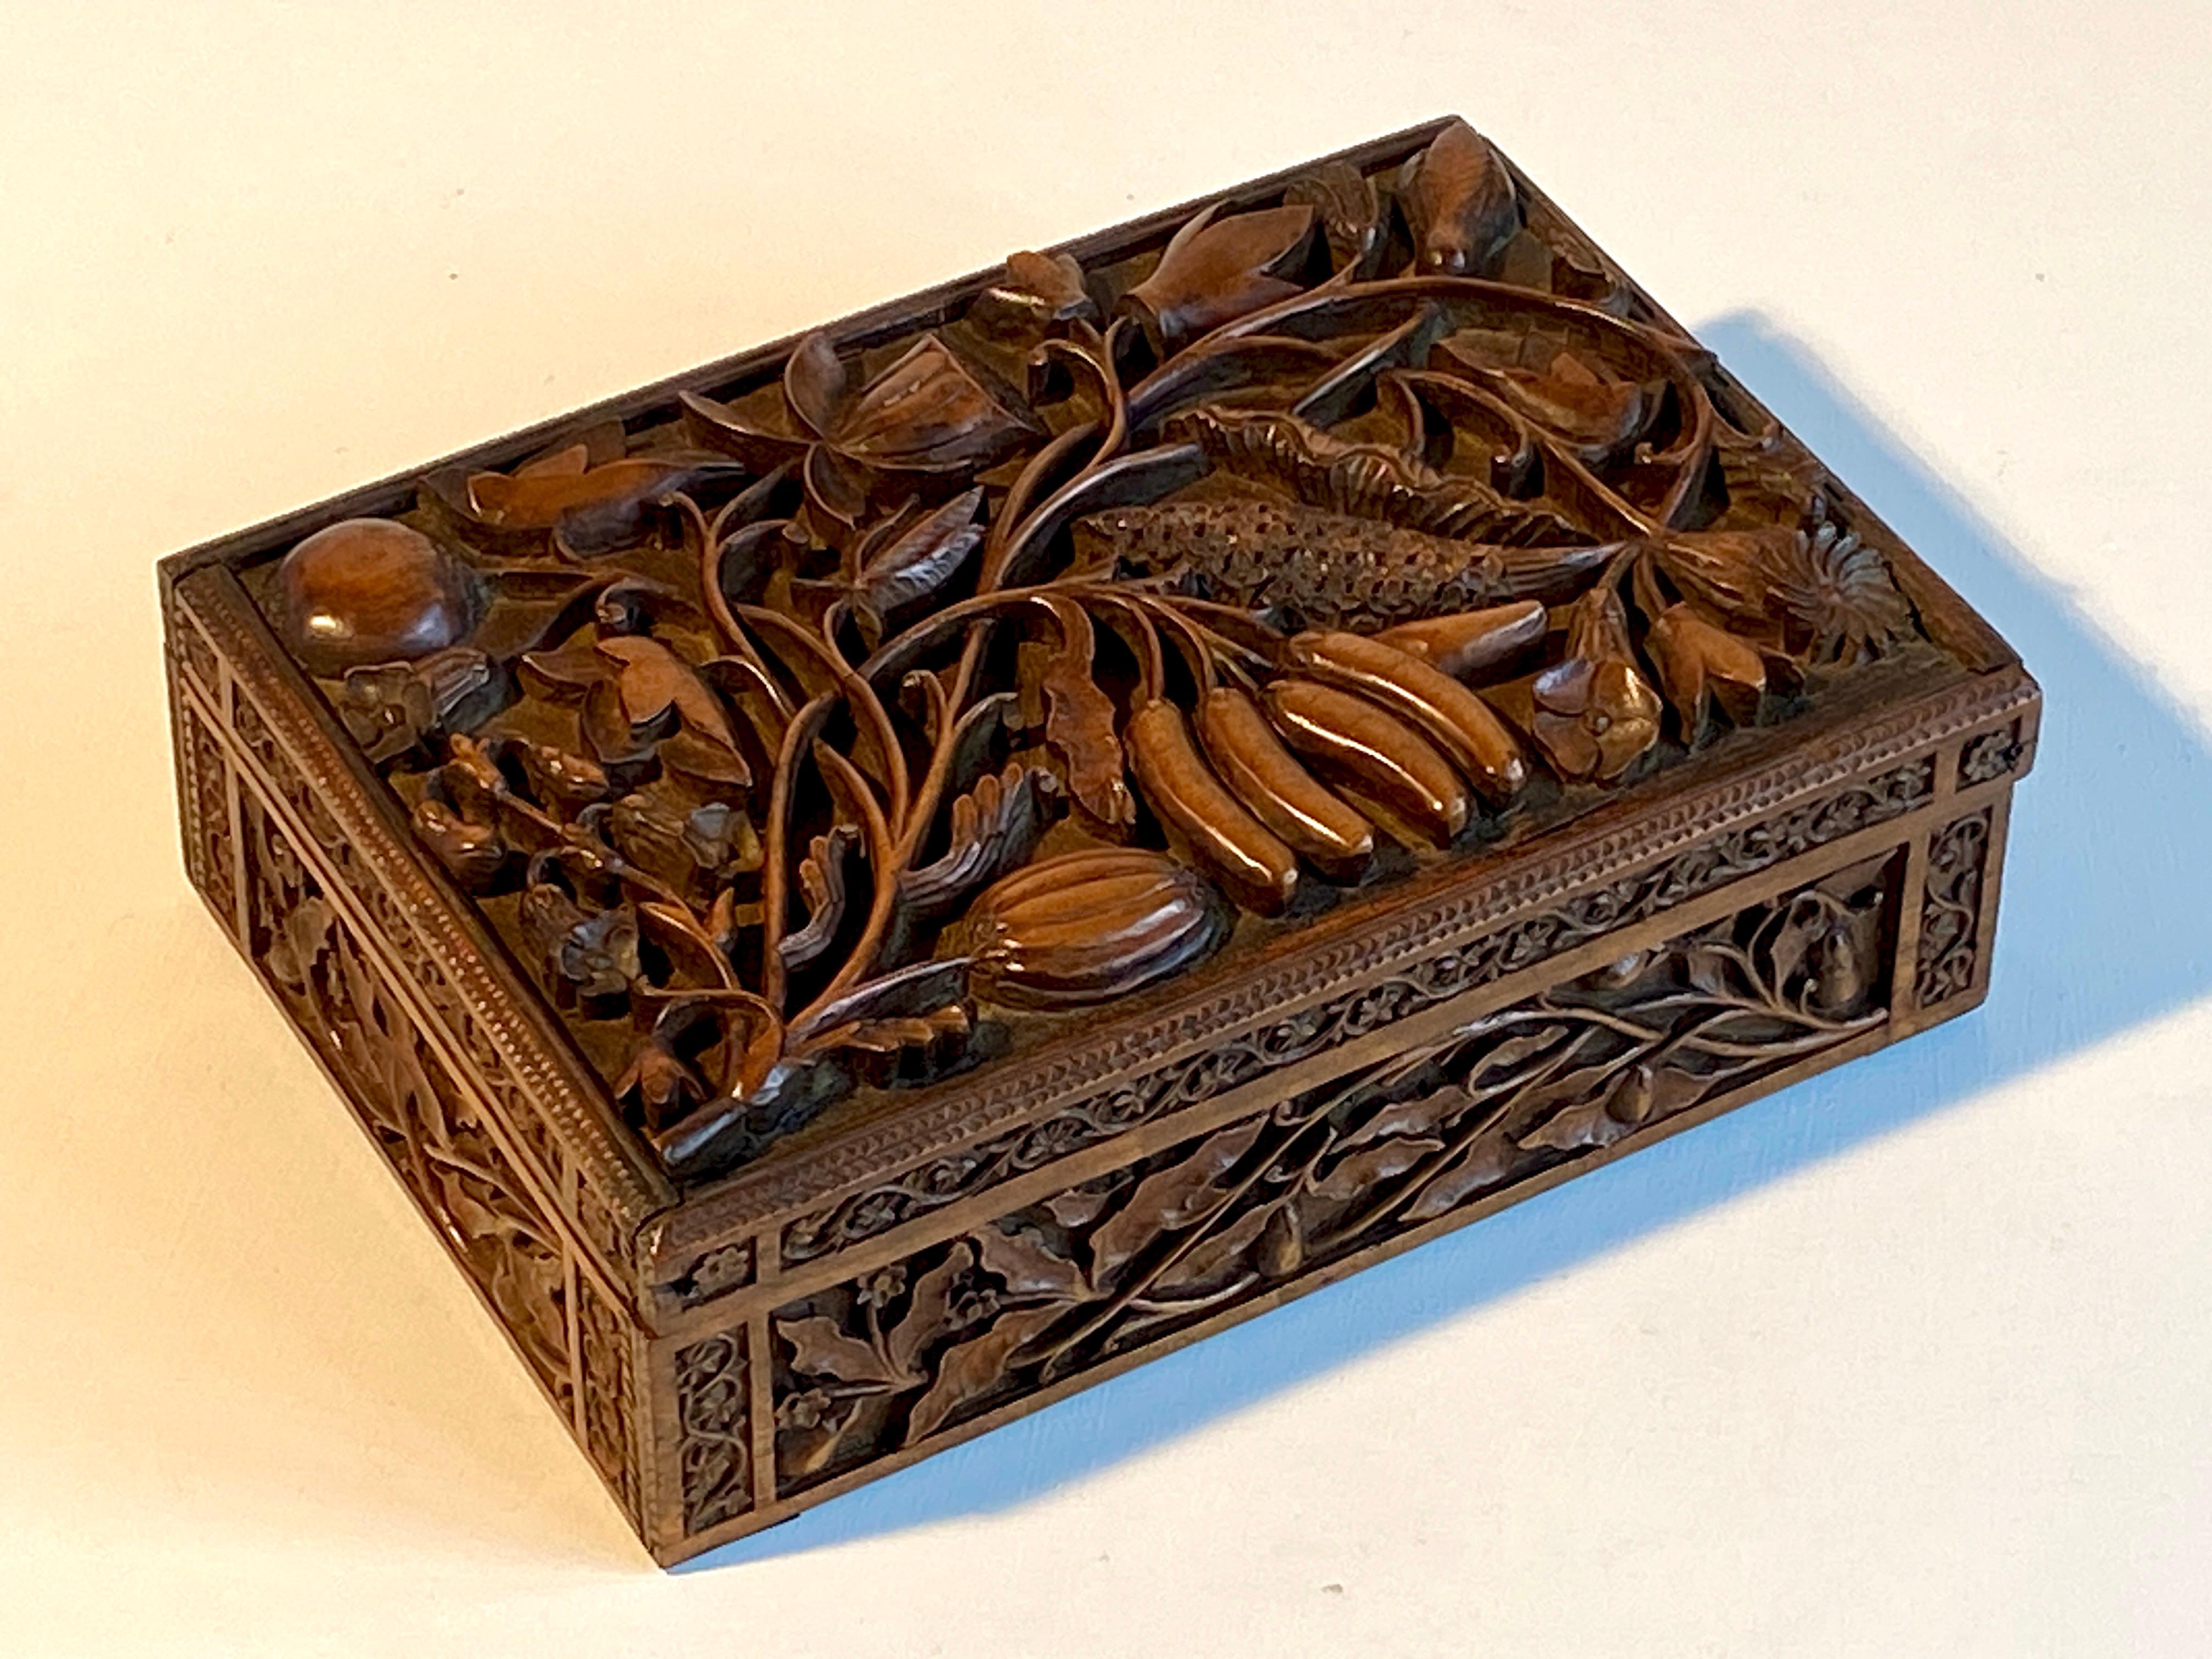 Campaign Box Carved Gentleman's British Army WW2 Regimental Arms

Beautifully stylized and masterfully carved wooden box of floral and fruit foliage bas-relief on the outside and British Army WW2 regimental arms motif crests and plaque on the